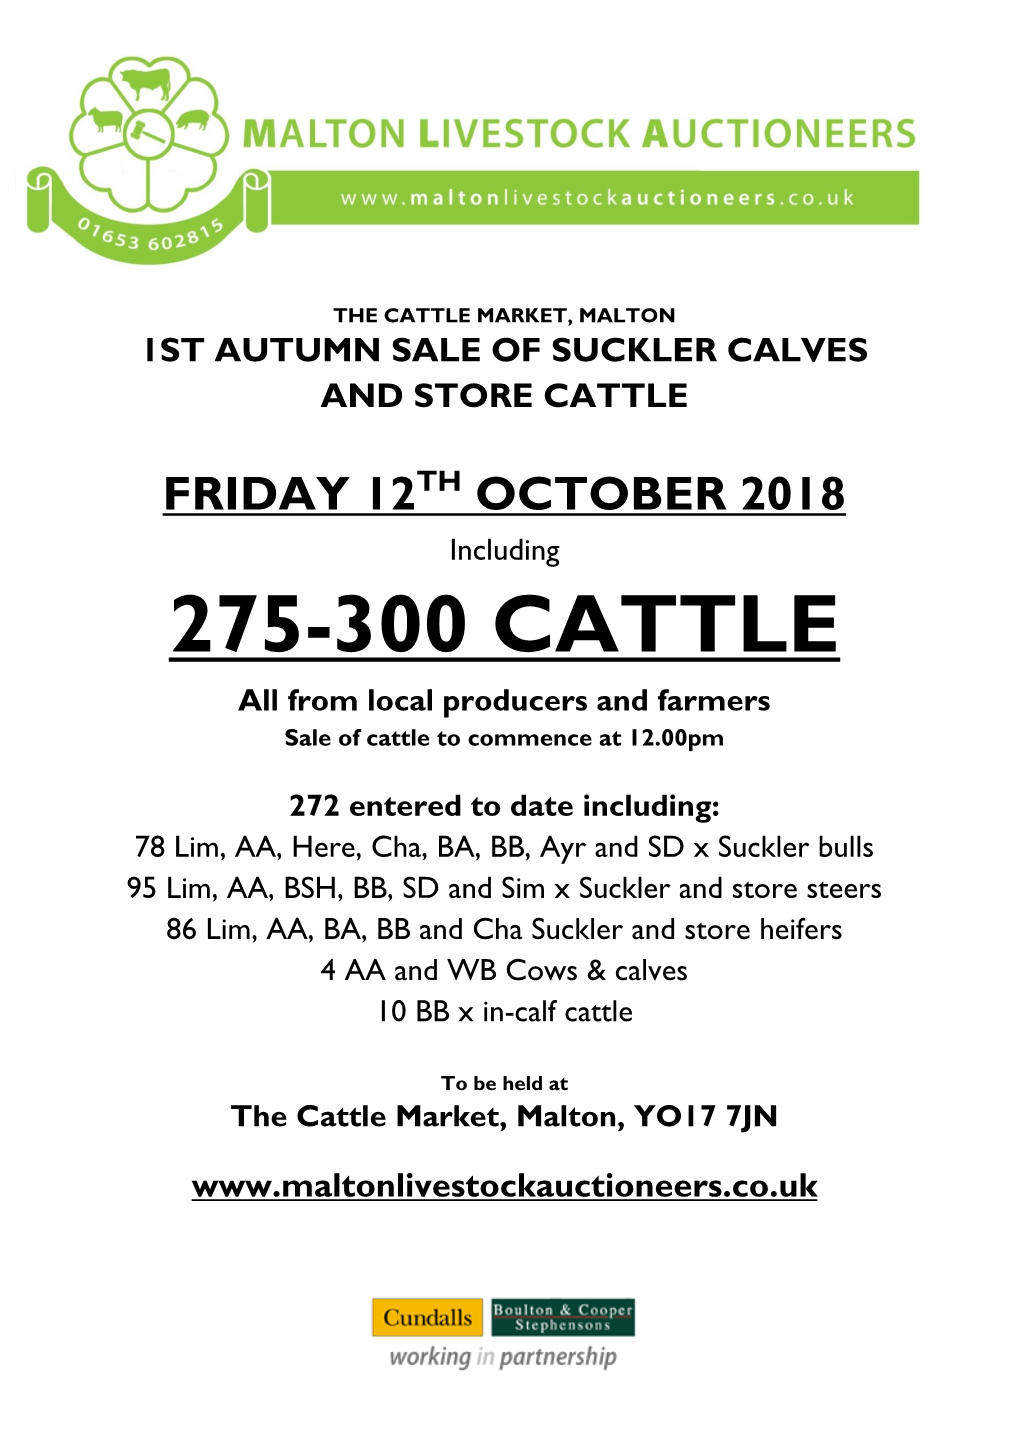 275-300 CATTLE All from Local Producers and Farmers Sale of Cattle to Commence at 12.00Pm